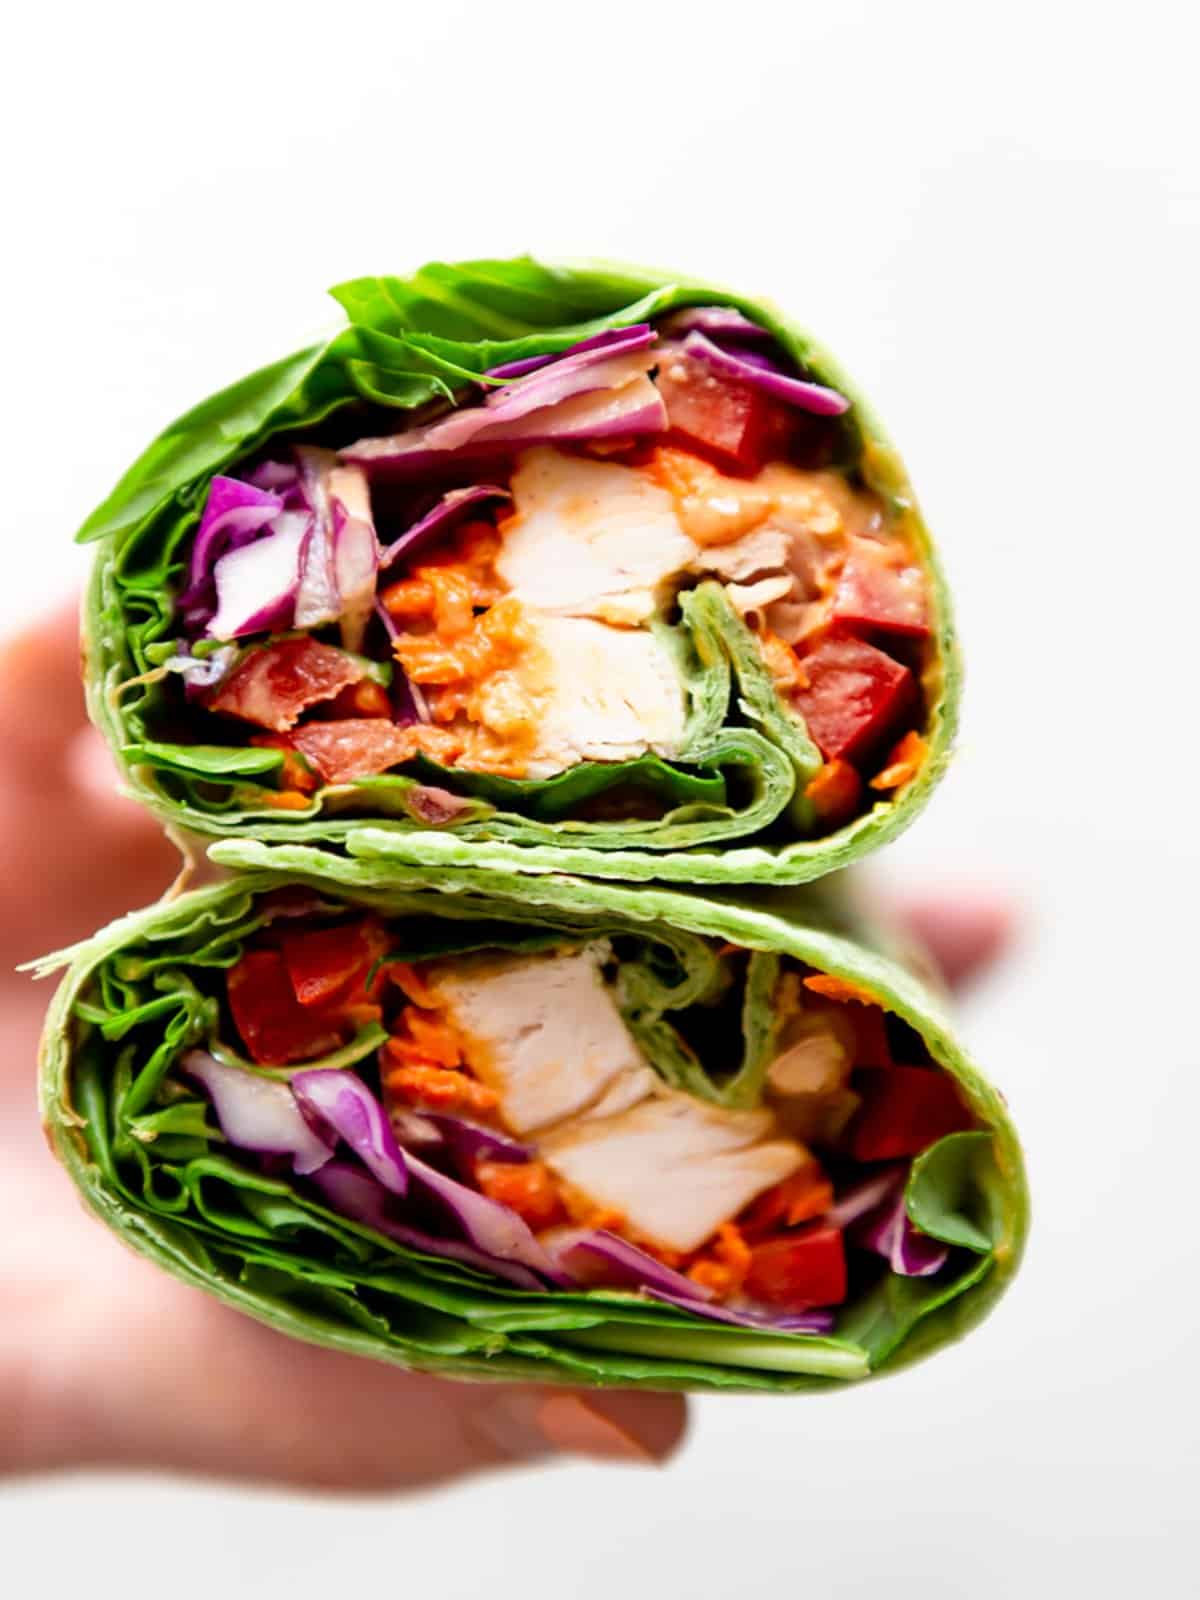 A person holding a peanut chicken wrap packed with vibrant lettuce and fresh vegetables.